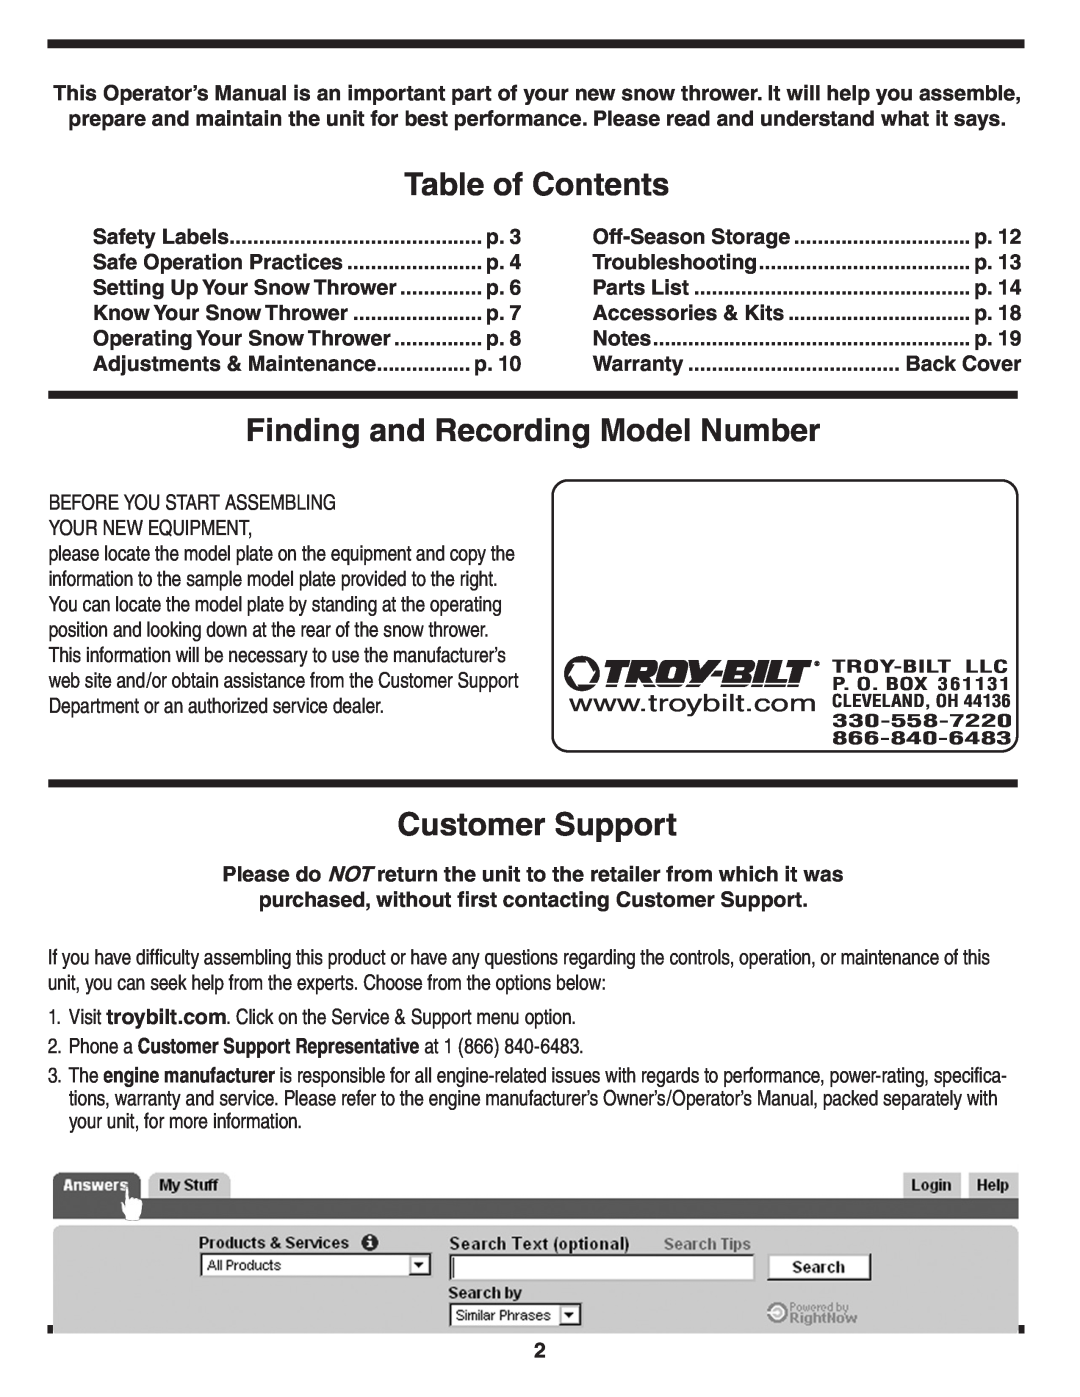 Troy-Bilt 5521 warranty Table of Contents, Finding and Recording Model Number, Customer Support 